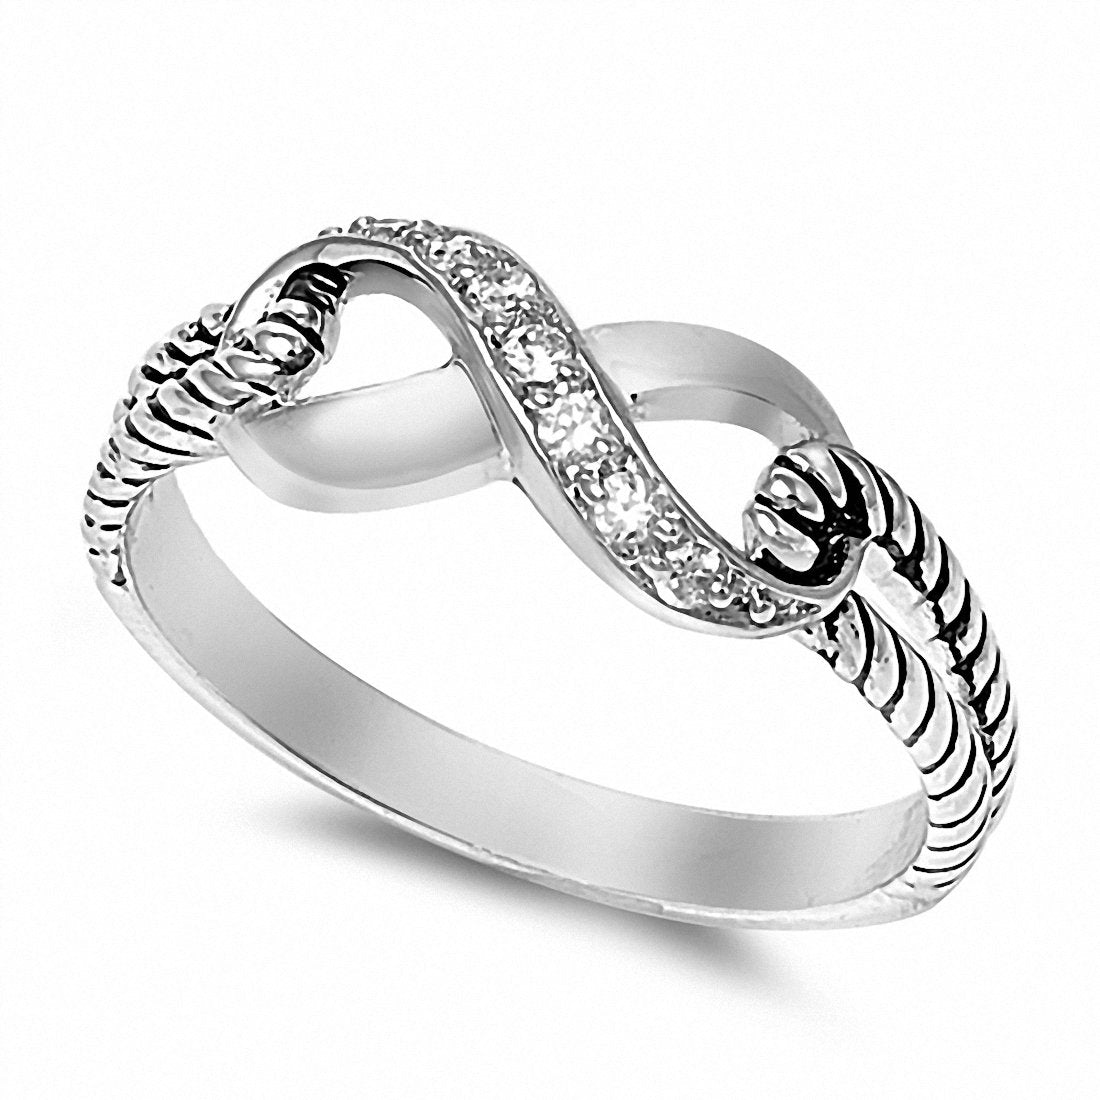 Cable Twisted Braided Design Split Shank Infinity Ring 925 Sterling Silver Choose Color